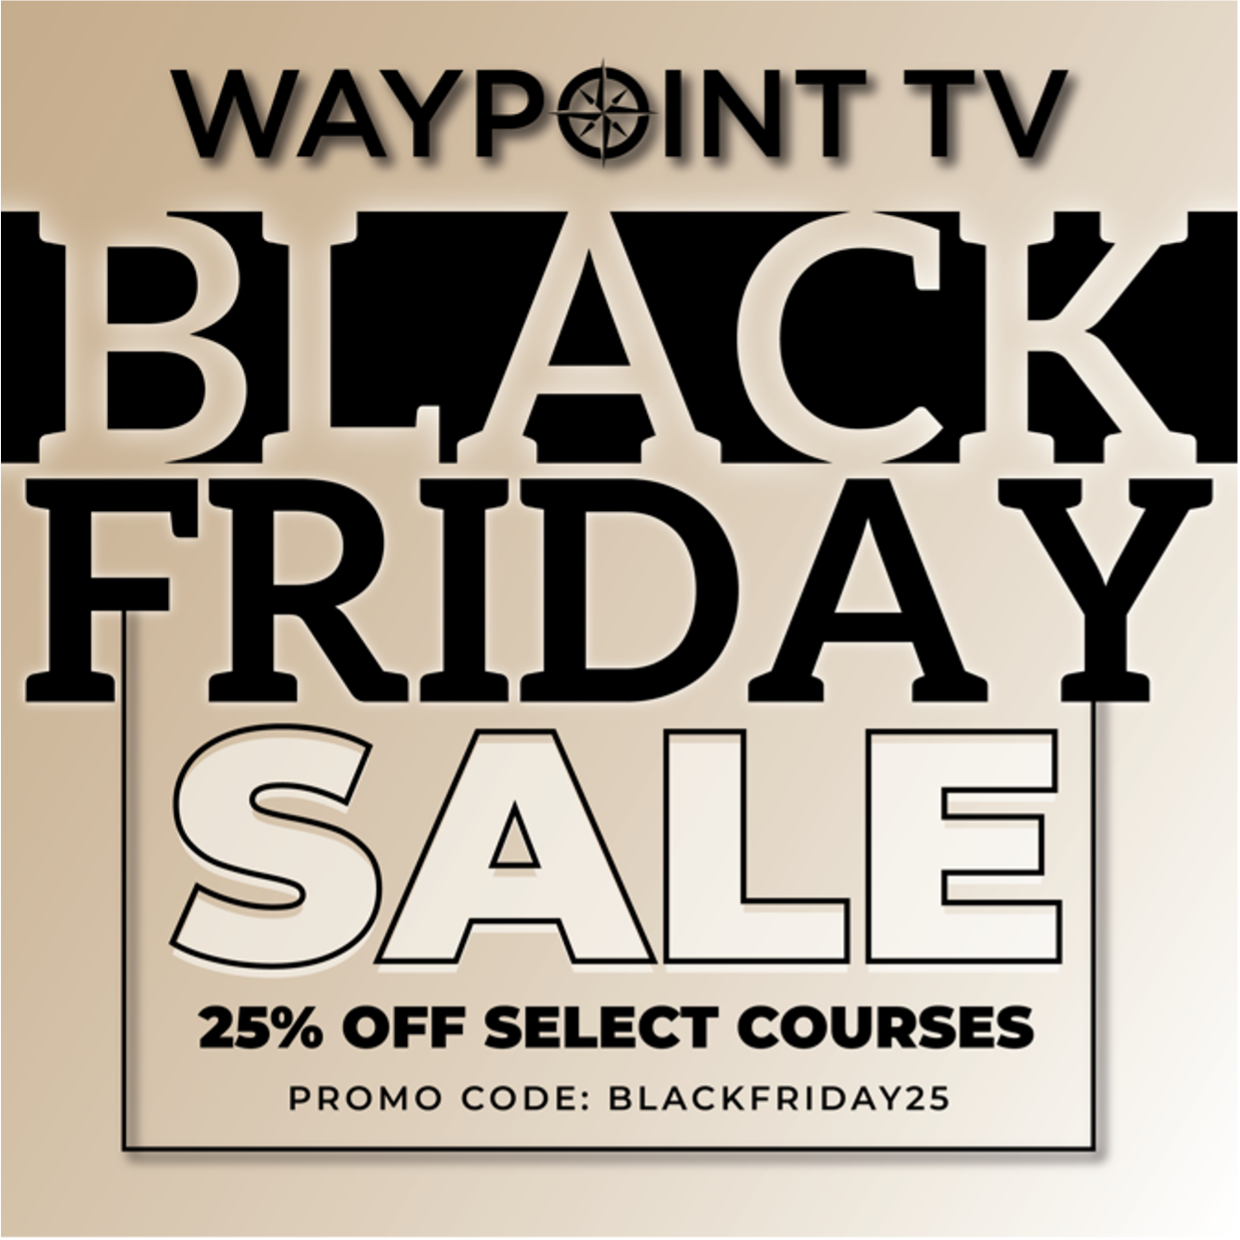 Waypoint TV Black Friday Sale on Online Courses